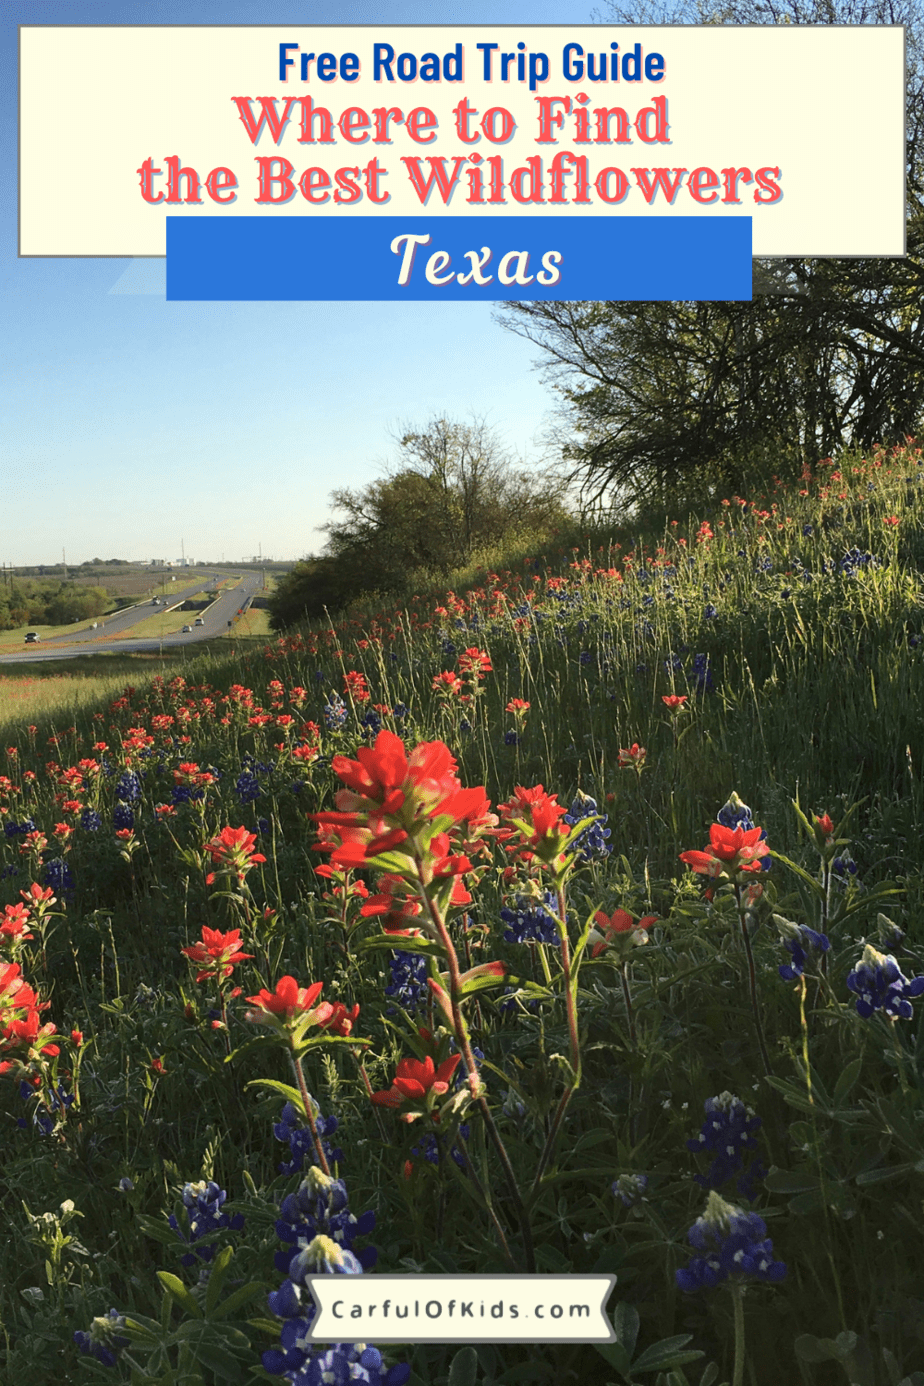 Take a drive down a Texas highway and find a hillside covered in wildflowers. Or spend the day in a Texas State Park exploring a wildflower meadow. Here's 15 places to explore to find Texas Wildflowers during the Spring. Where to find the best wildflowers in Texas | Where to find wildflowers in the Texas Hill Country #Texas #Wildflowers 